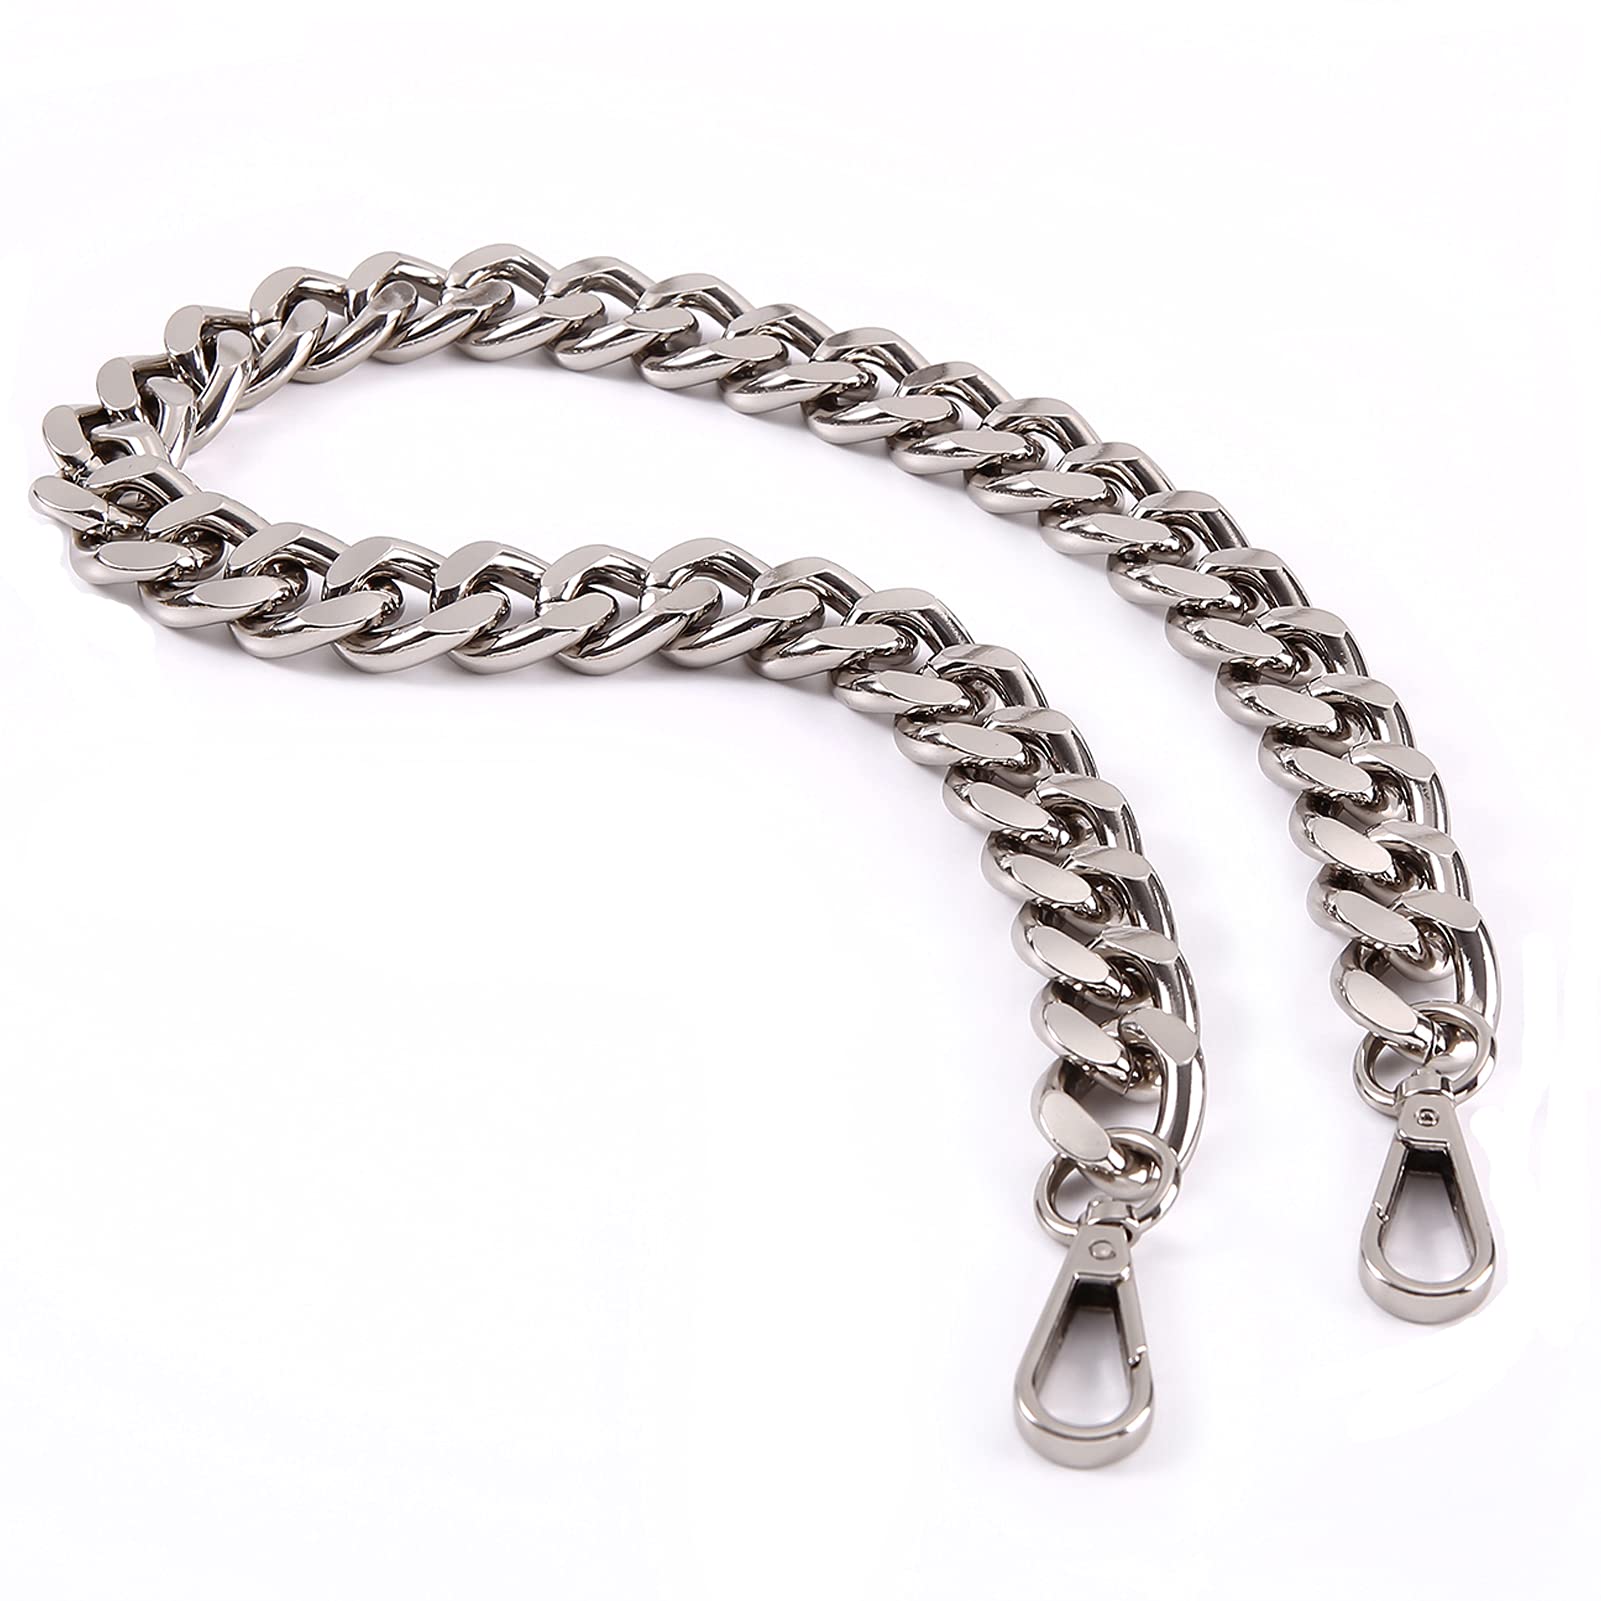 Premium Silver Chain Strap with Buckles for Women Purse Bag Strap  Replacement, Wide 7mm O Type Crossbody/Shoulder Bag Chain Strap - Length 49  inch : Amazon.in: Bags, Wallets and Luggage